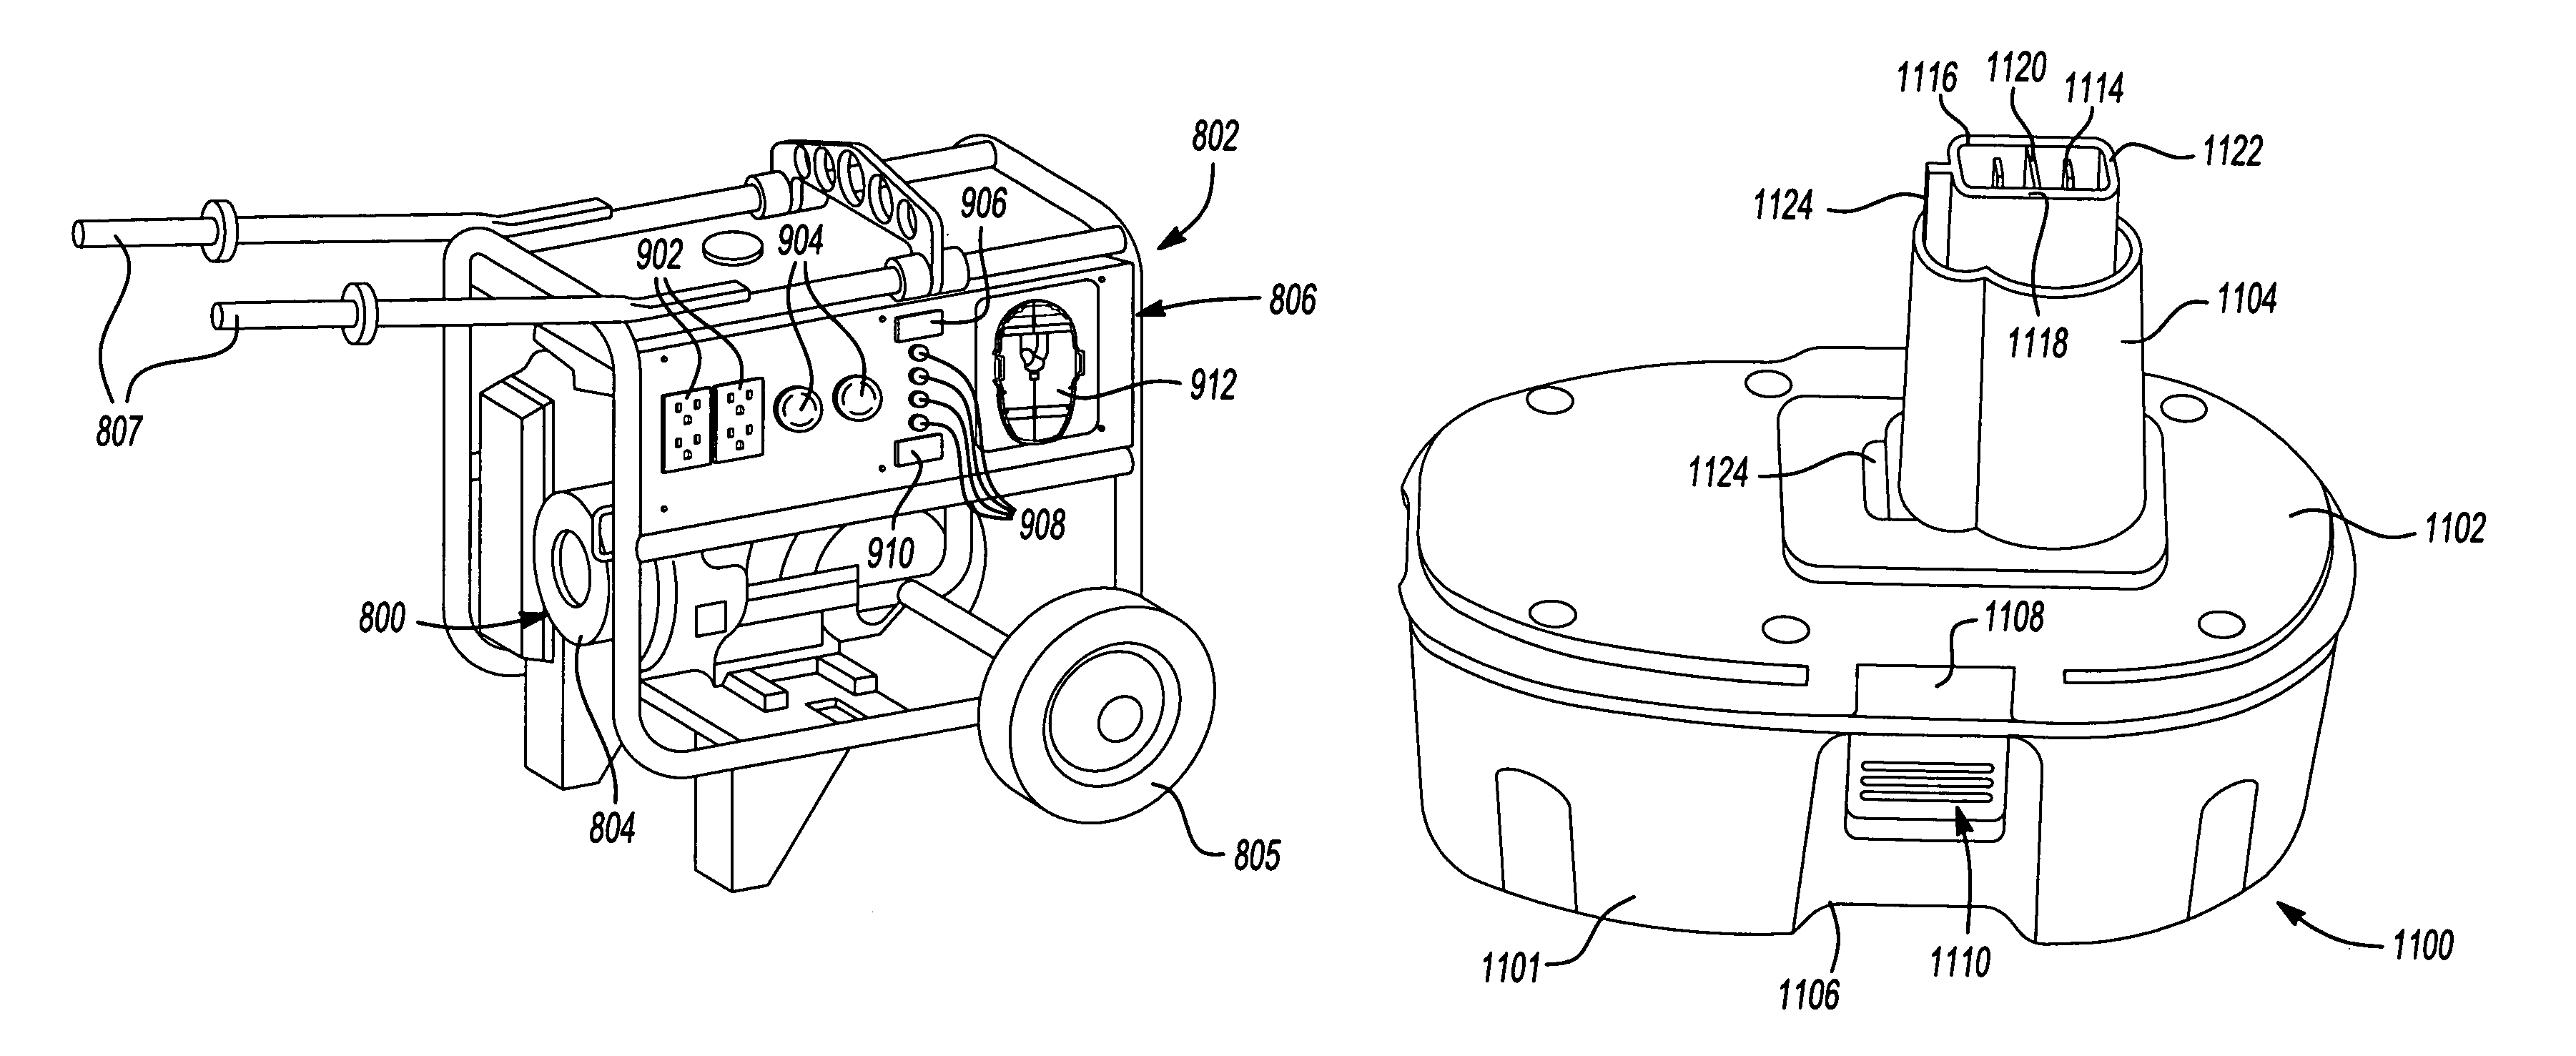 Starter system for portable internal combustion engine electric generators using a portable universal battery pack